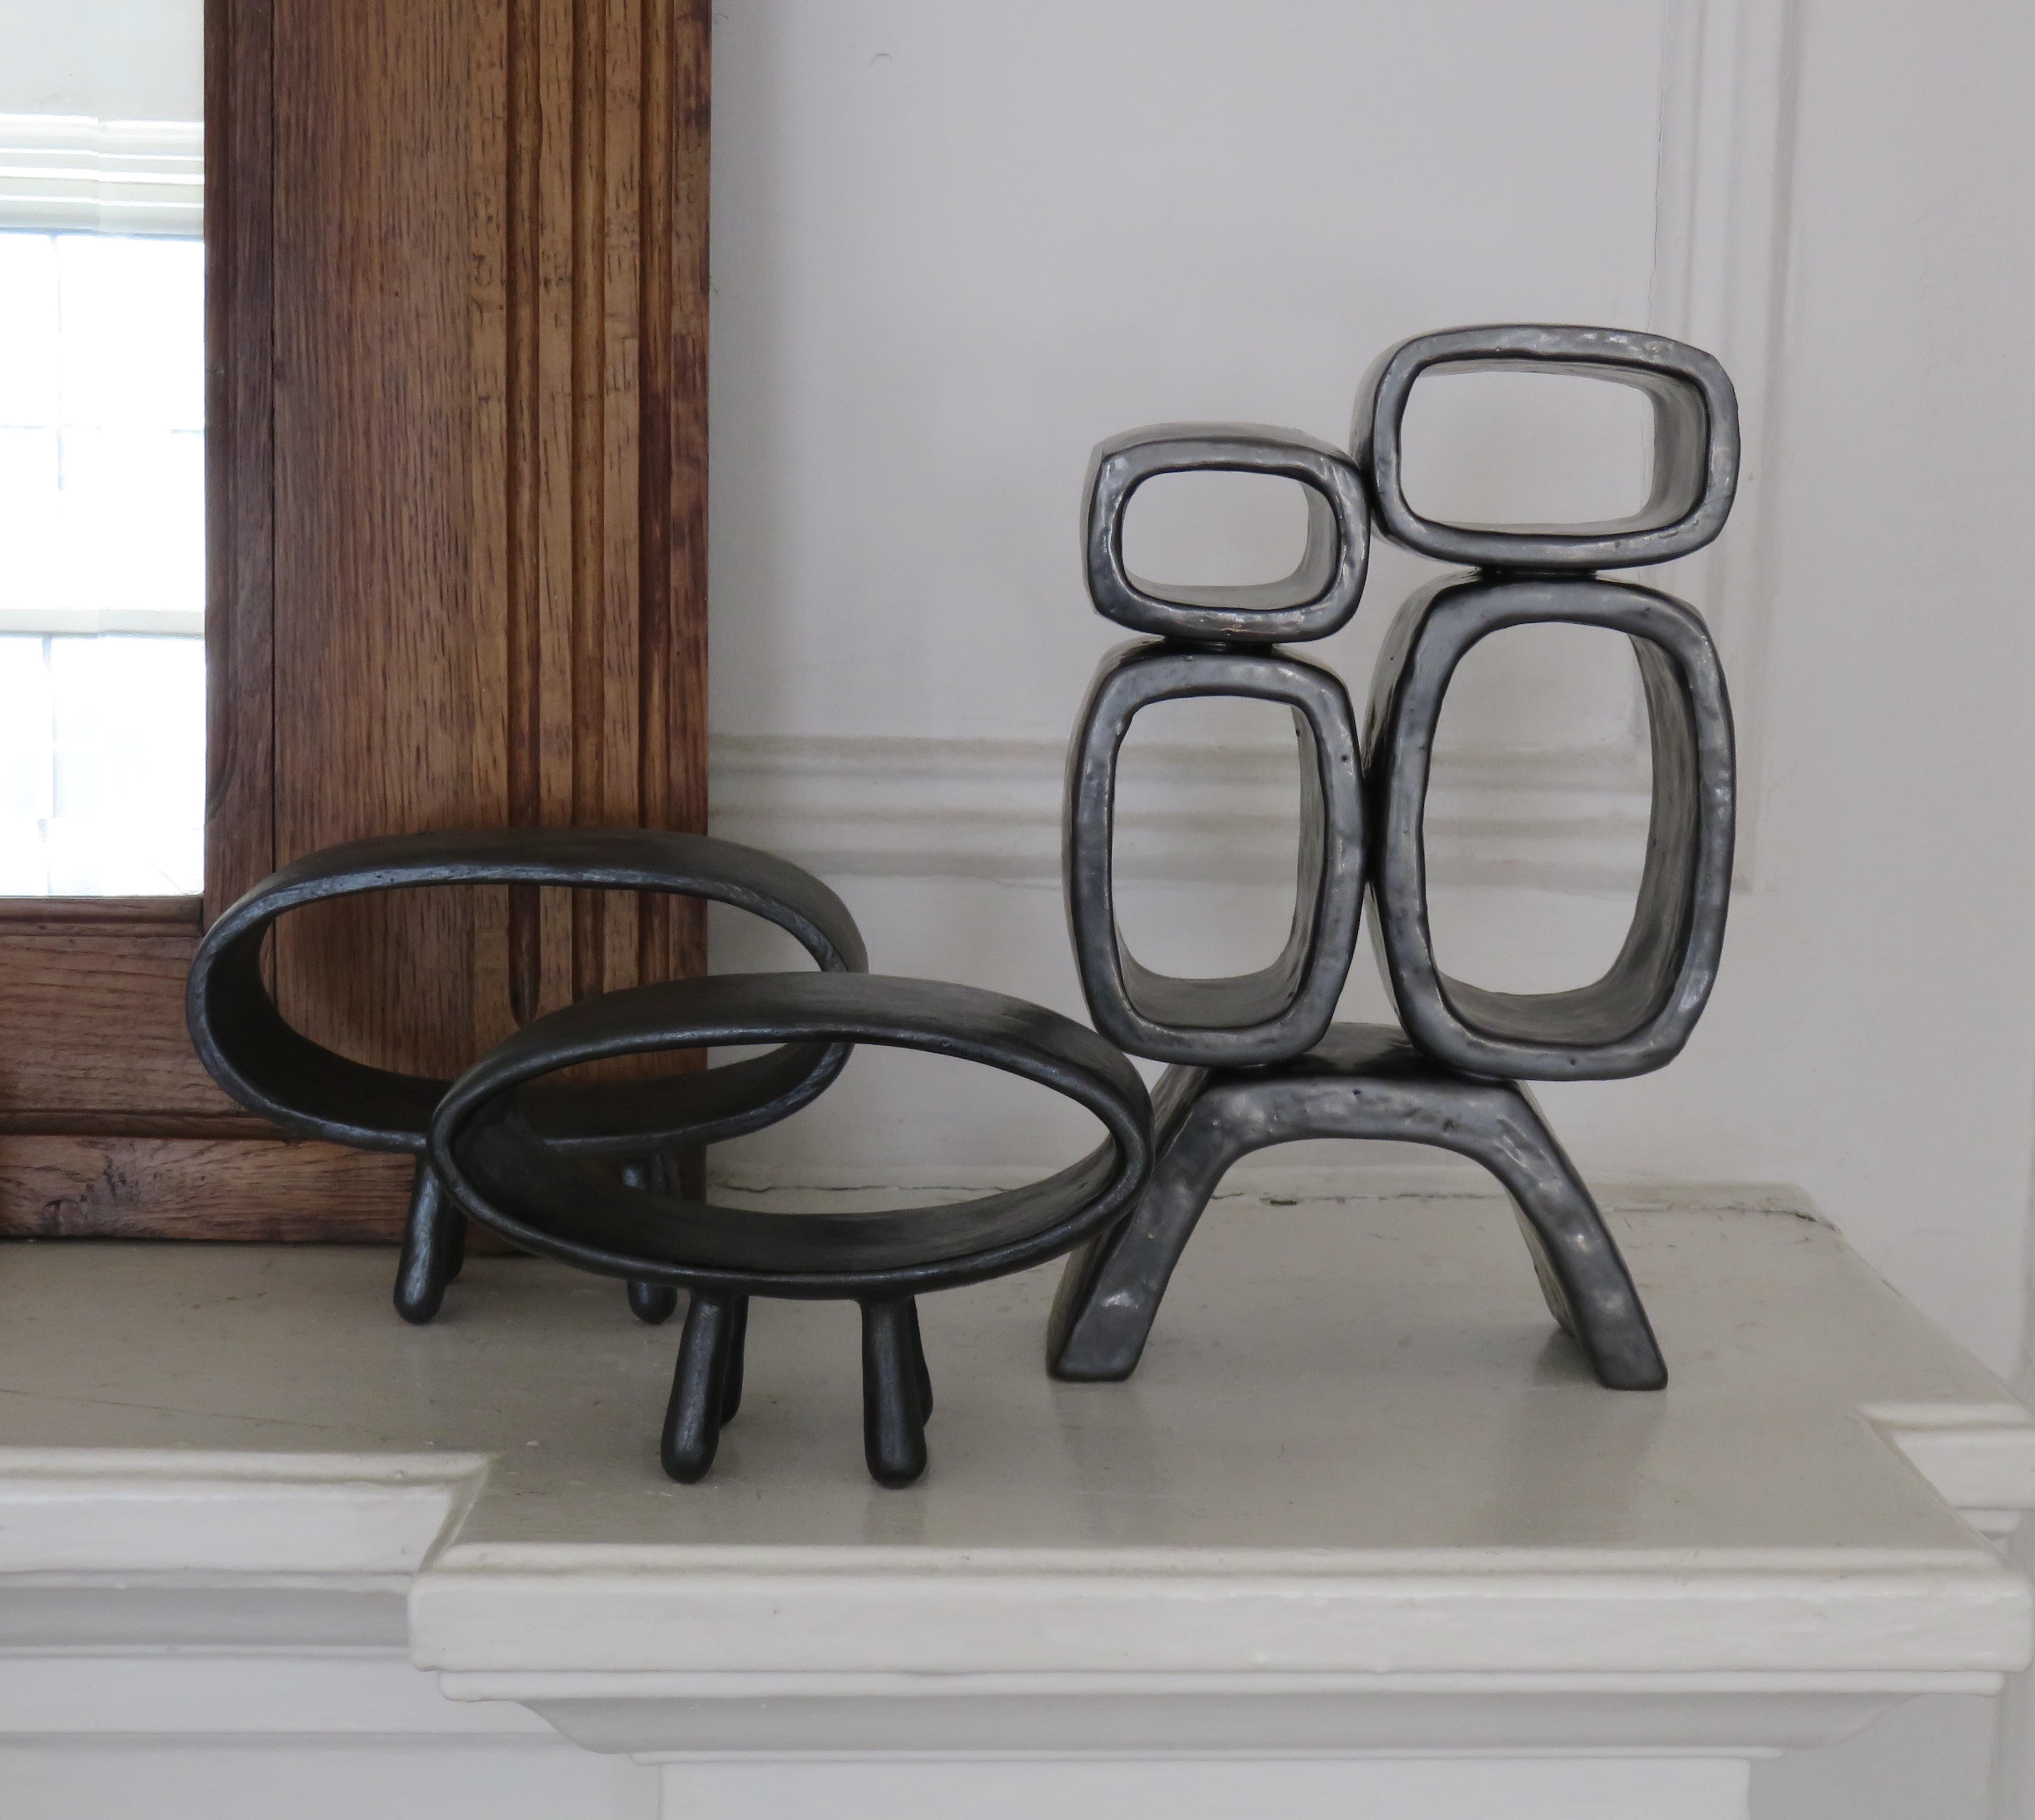 Metallic Black Hand-Built Ceramic Sculpture with Small Rings on Legs 9